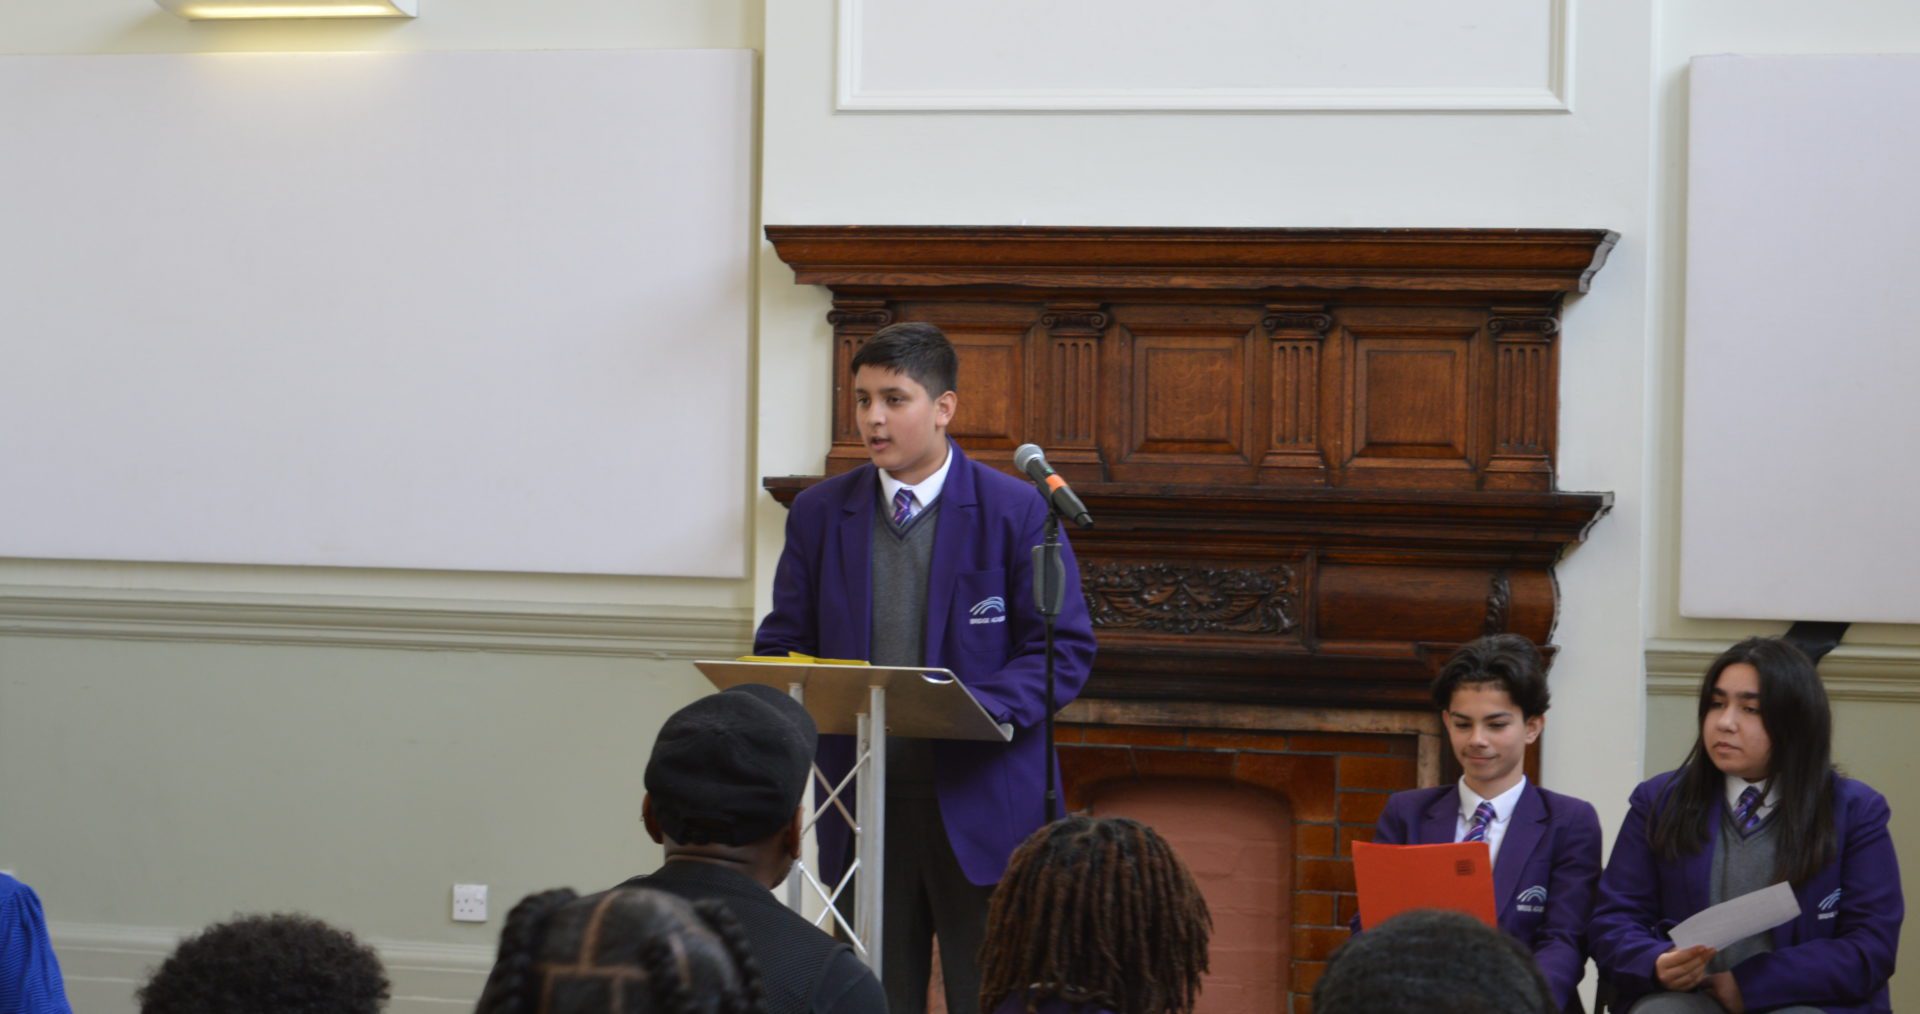 A young teenager stands in a purple school blazer delivering a speech to the audience at Shoreditch Town Hall.